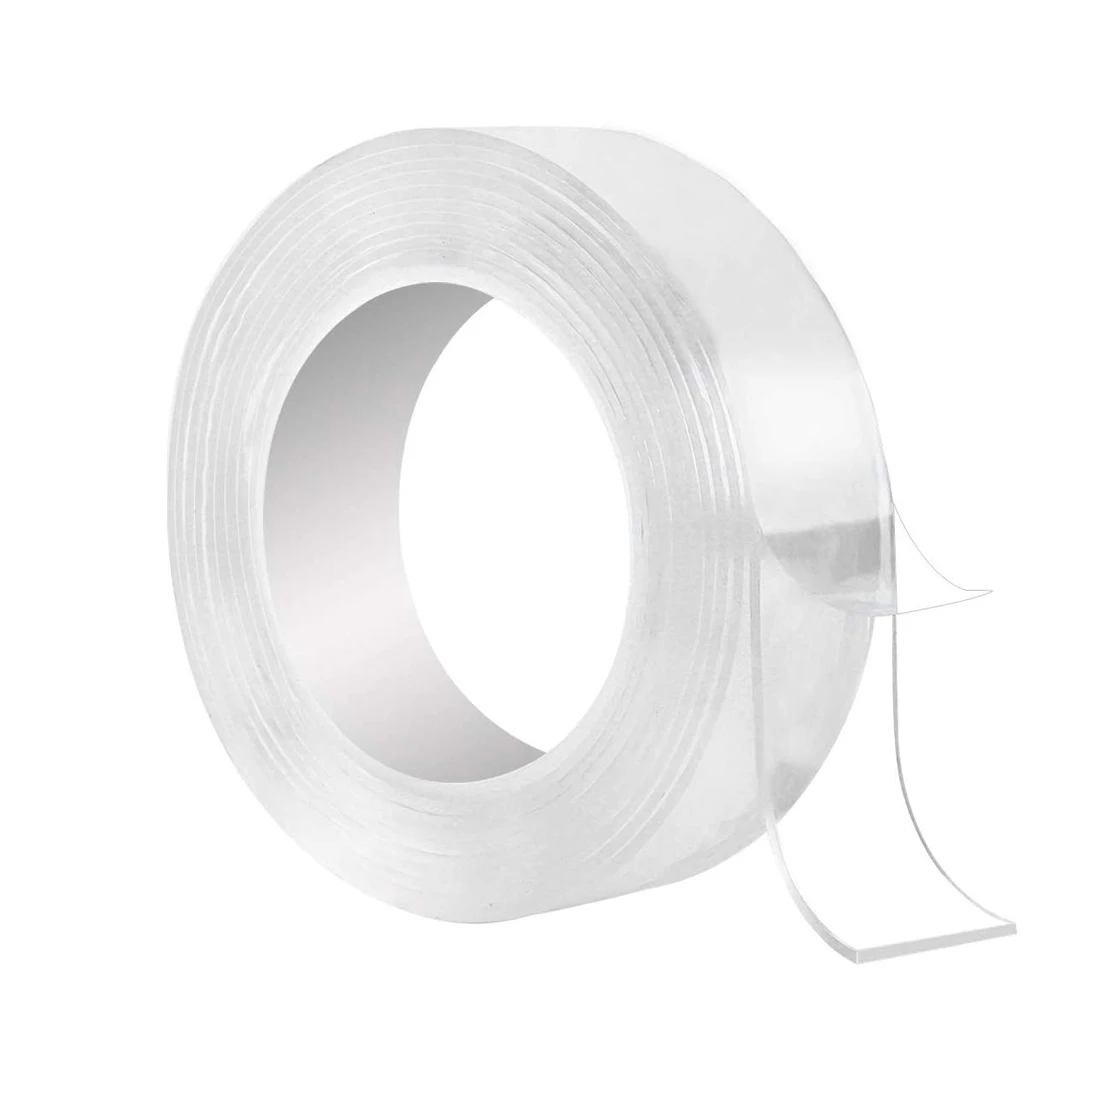 Nano double-sided tape strongly fixes the wall, acrylic waterproof tape,  high viscosity, traceless glue, does not damage the wall, can be removed  without leaving traces, waterproof nano tape